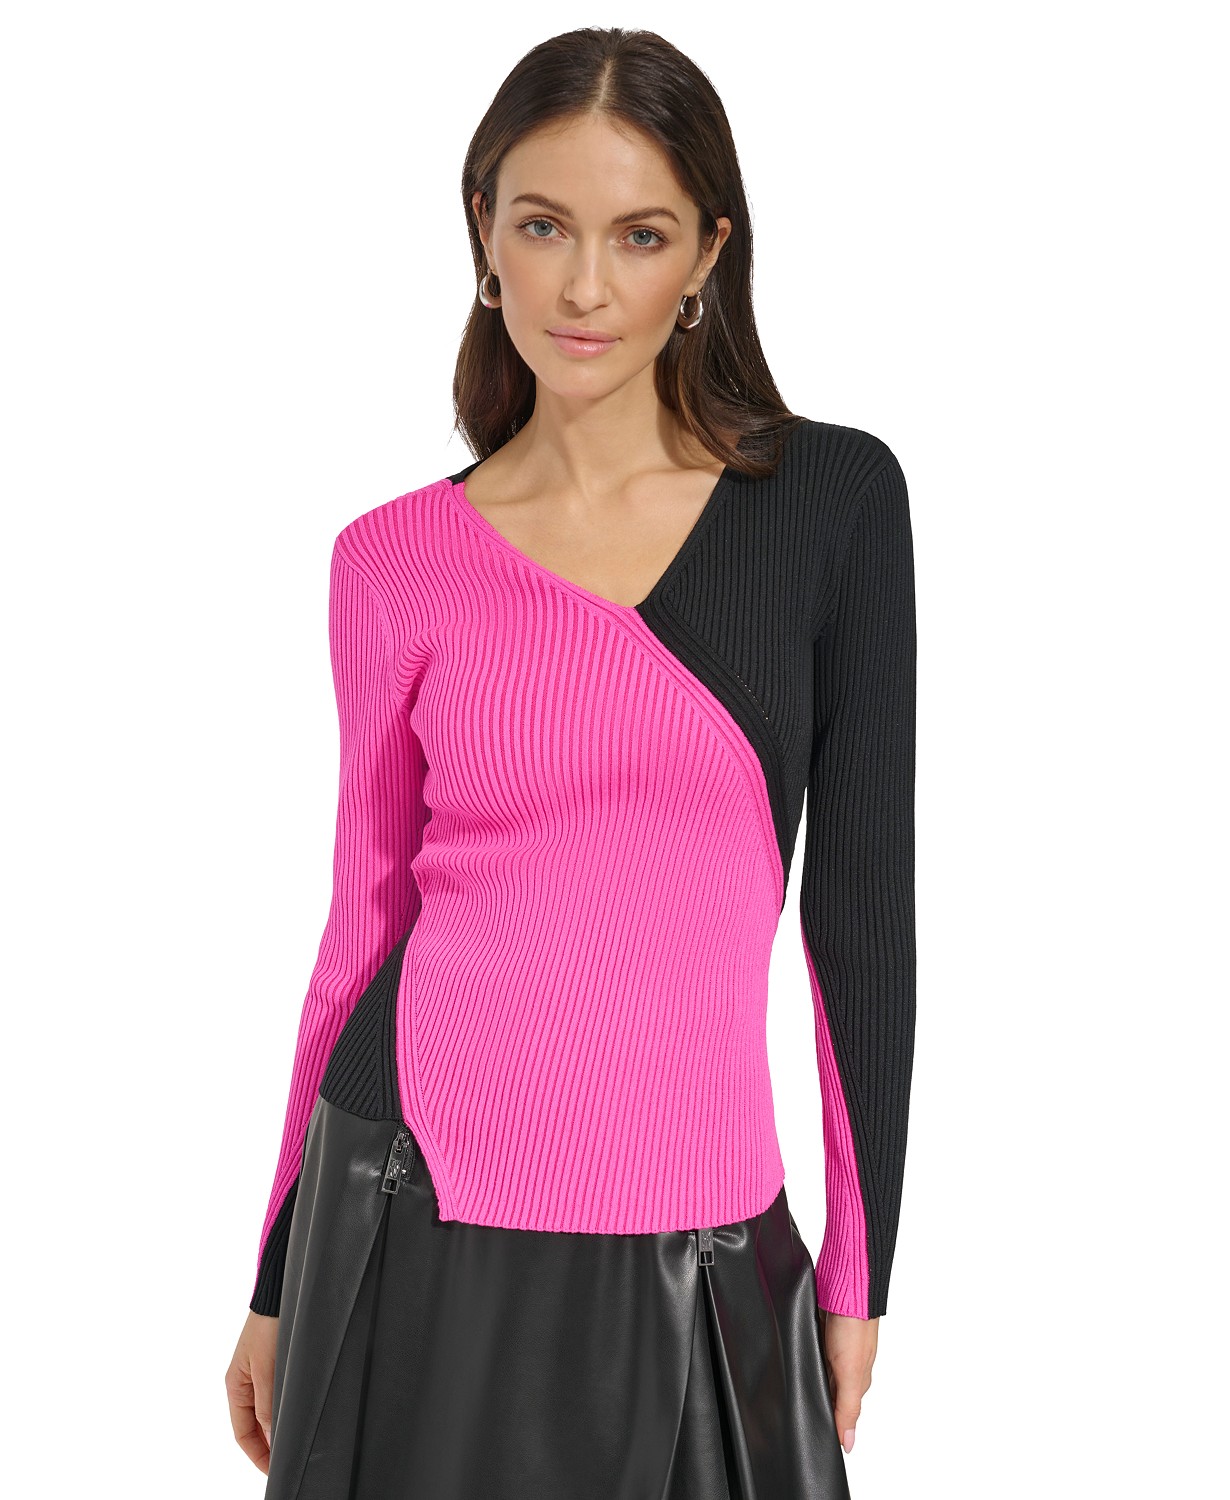 DKNY Womens Ribbed Colorblocked Asymmetrical Sweater